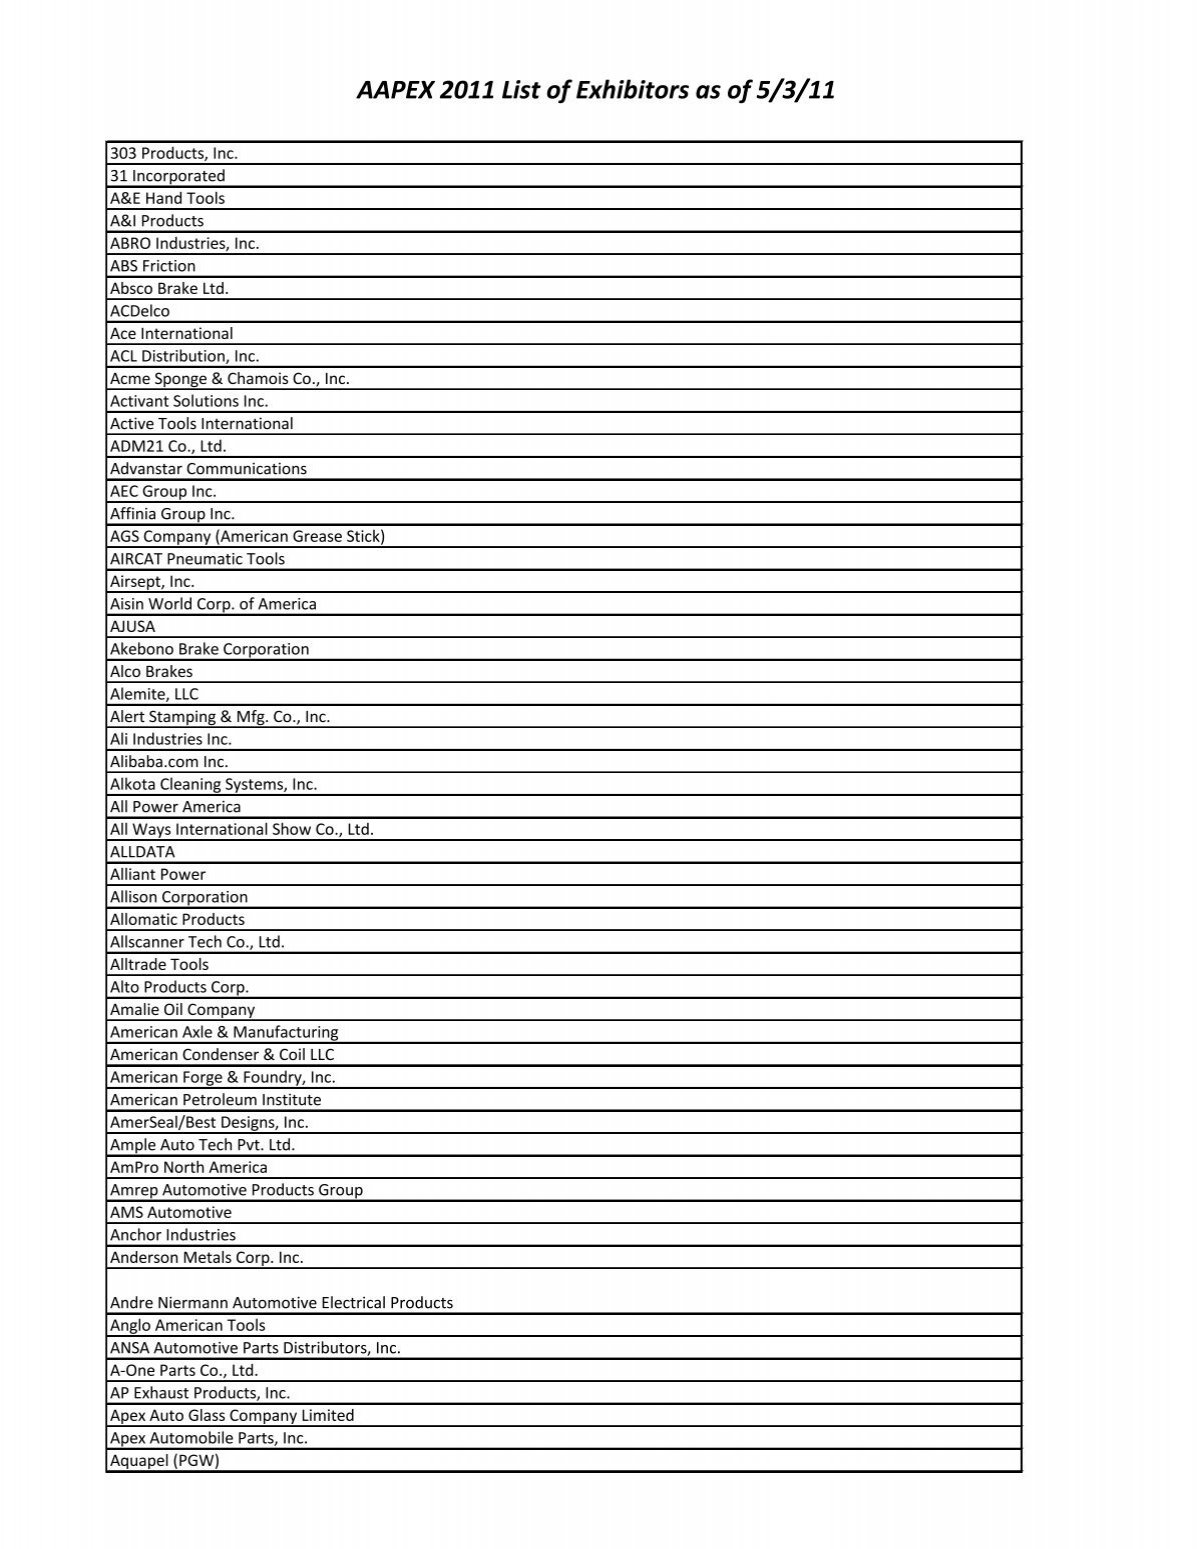 AAPEX 2011 List of Exhibitors as of 5/3/11